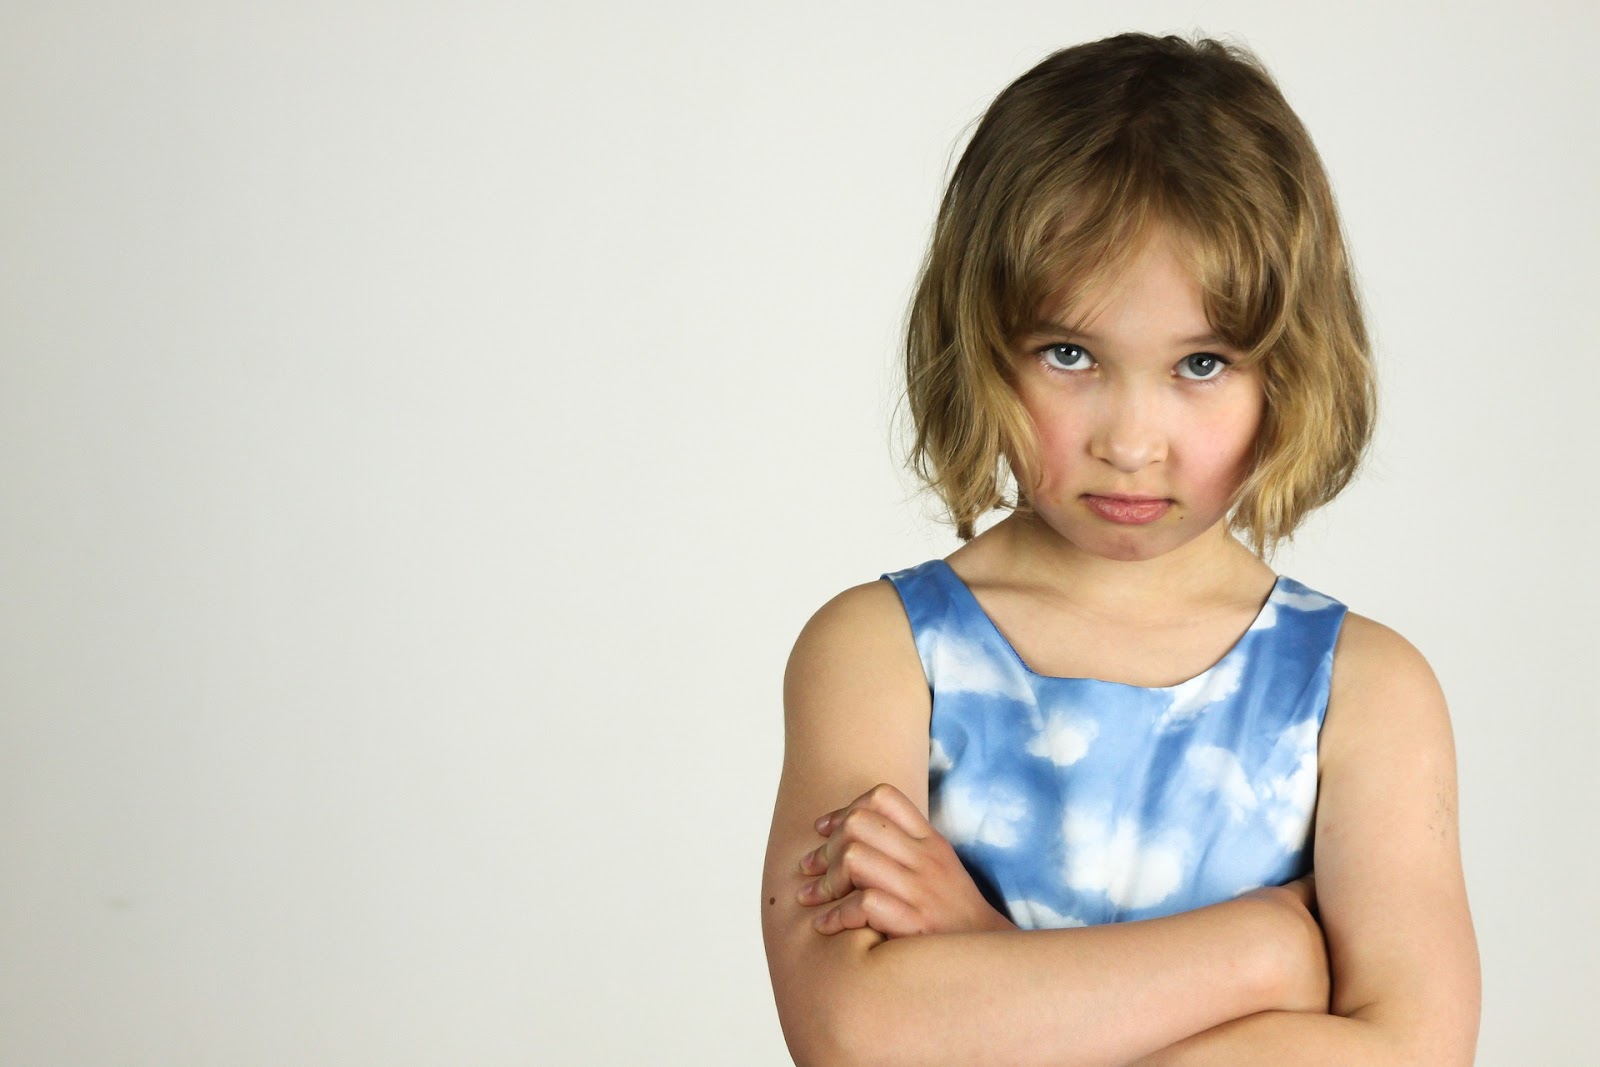 A picture of a young girl, arms folded, looking at the camera with a defiant look on her face.